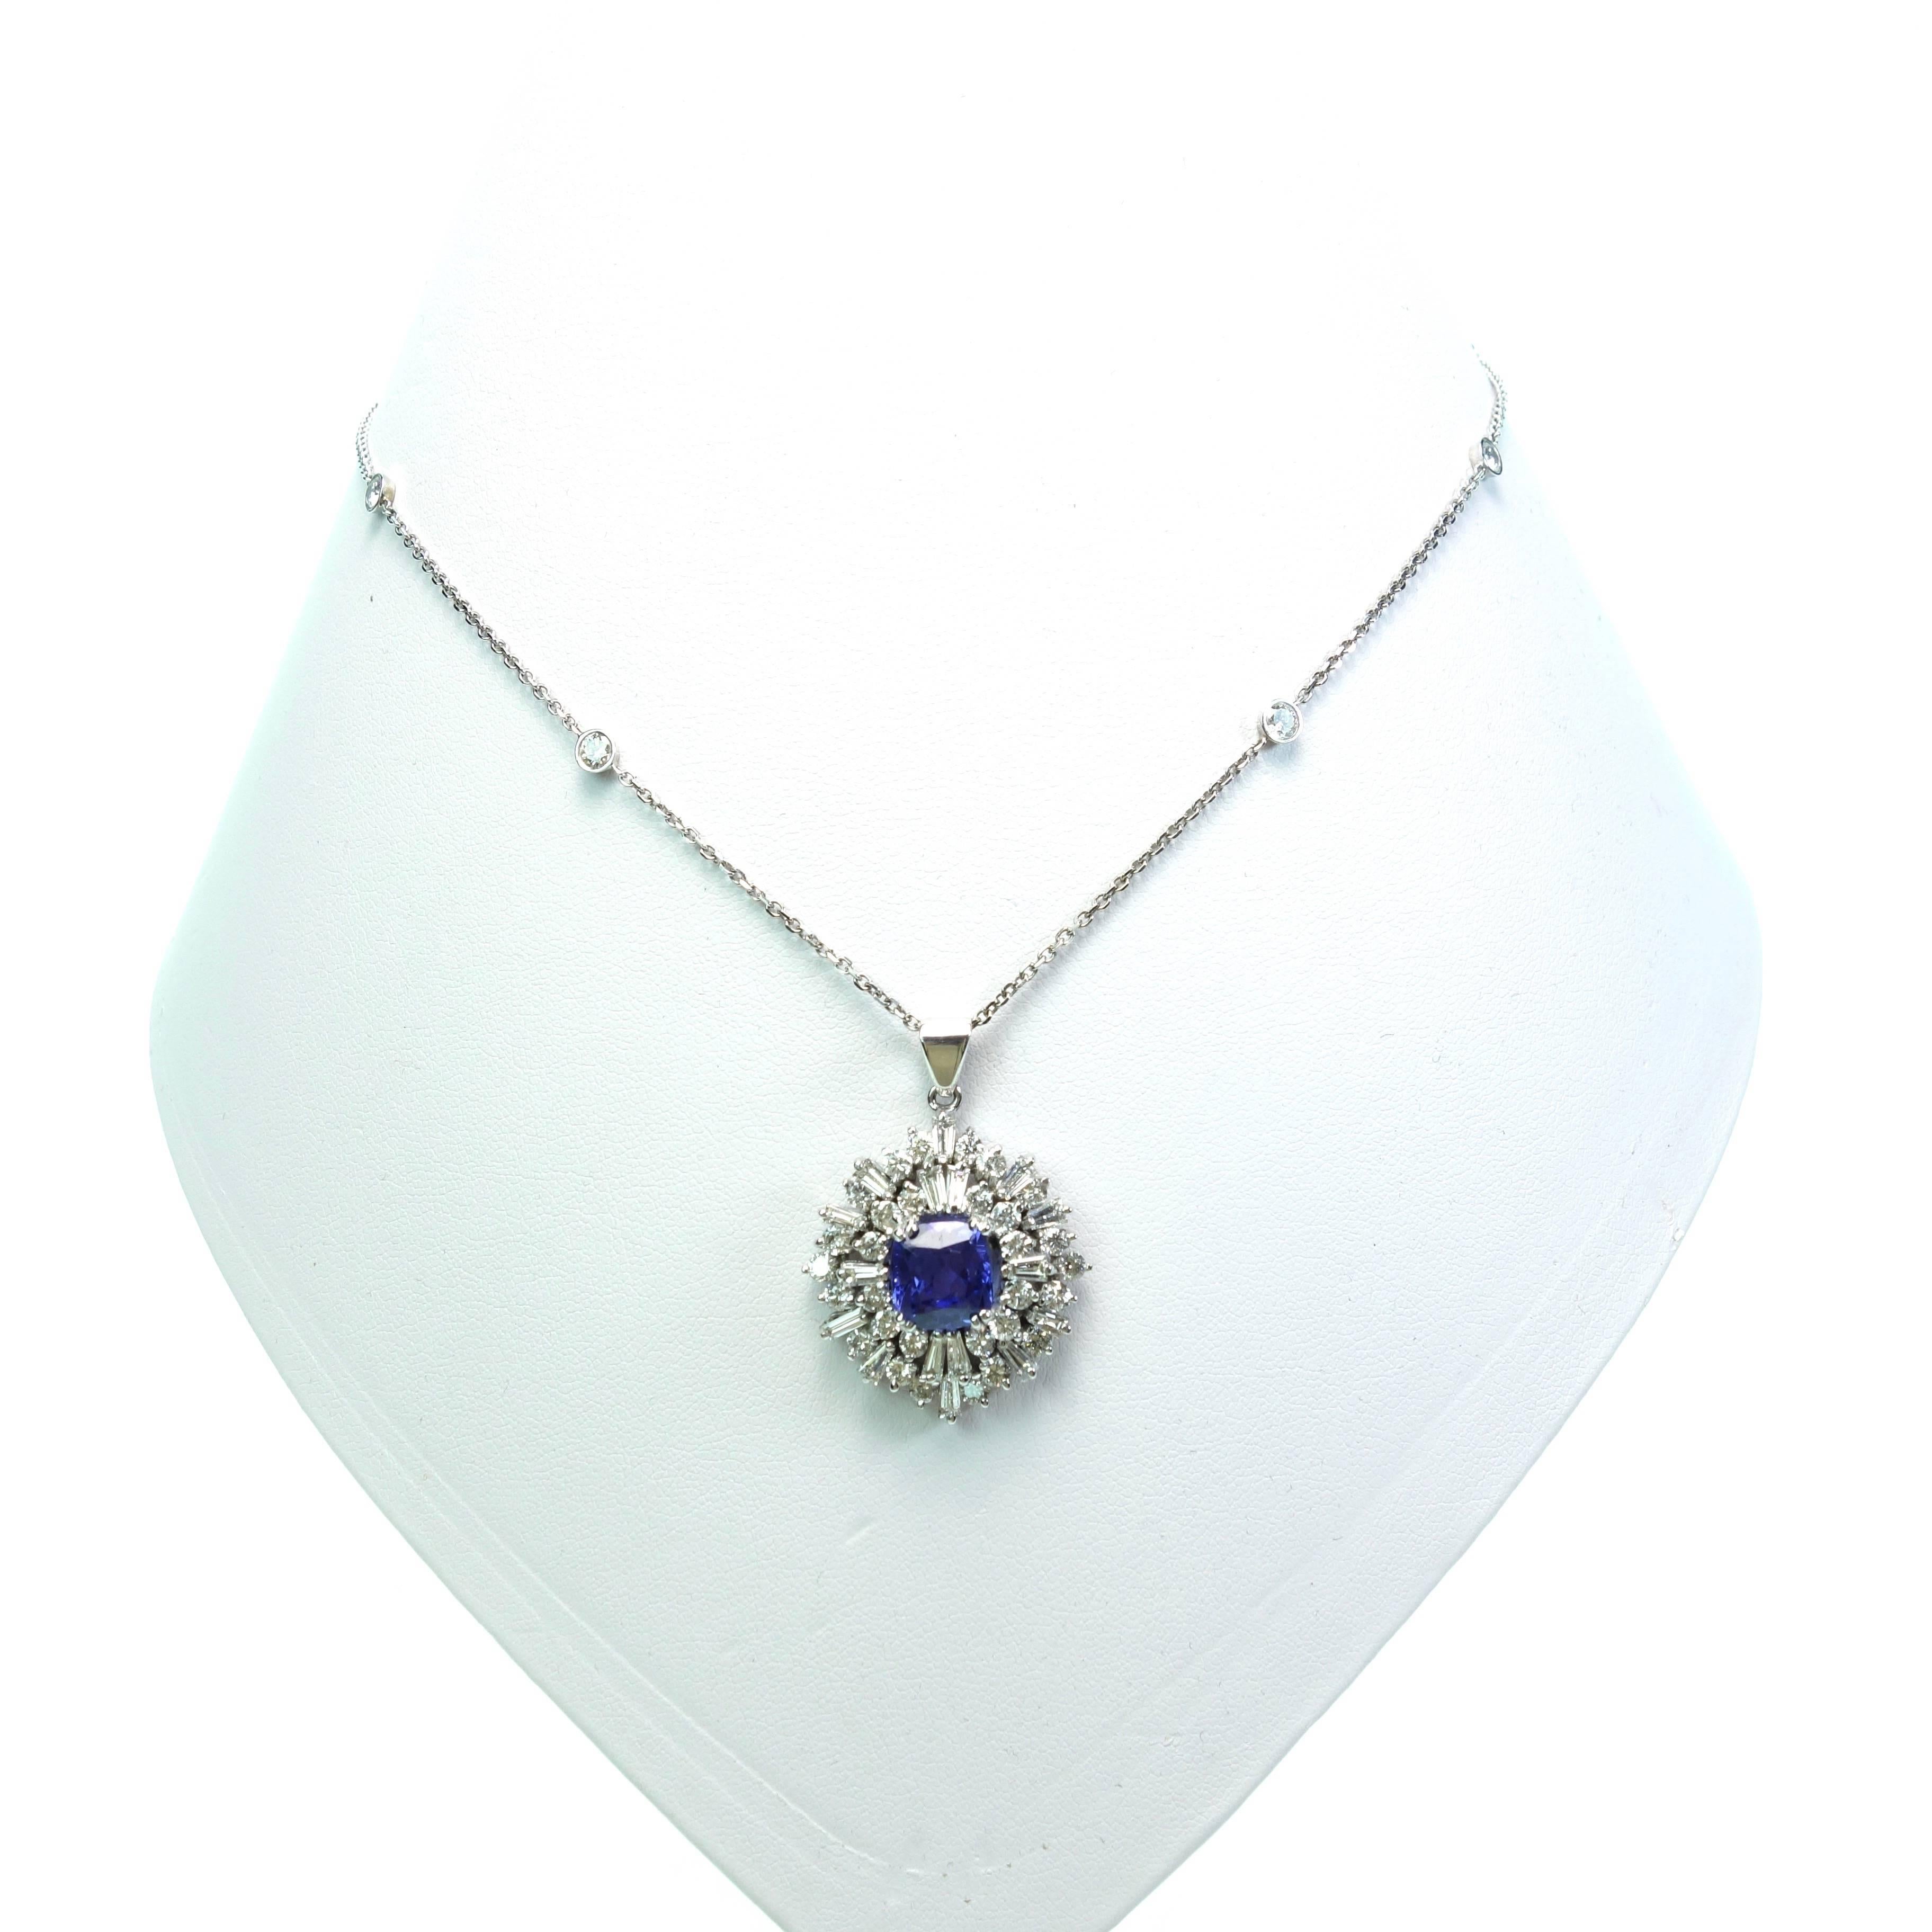 14KT white gold Tanzanite and Diamond pendant, featuring a cushion shaped Tanzanite solitaire approx. weight of 2.50ct, surrounded by 16 tapered baguette and 30 round brilliant cut diamonds. The approximate total weight of the diamonds is 3.60ct.